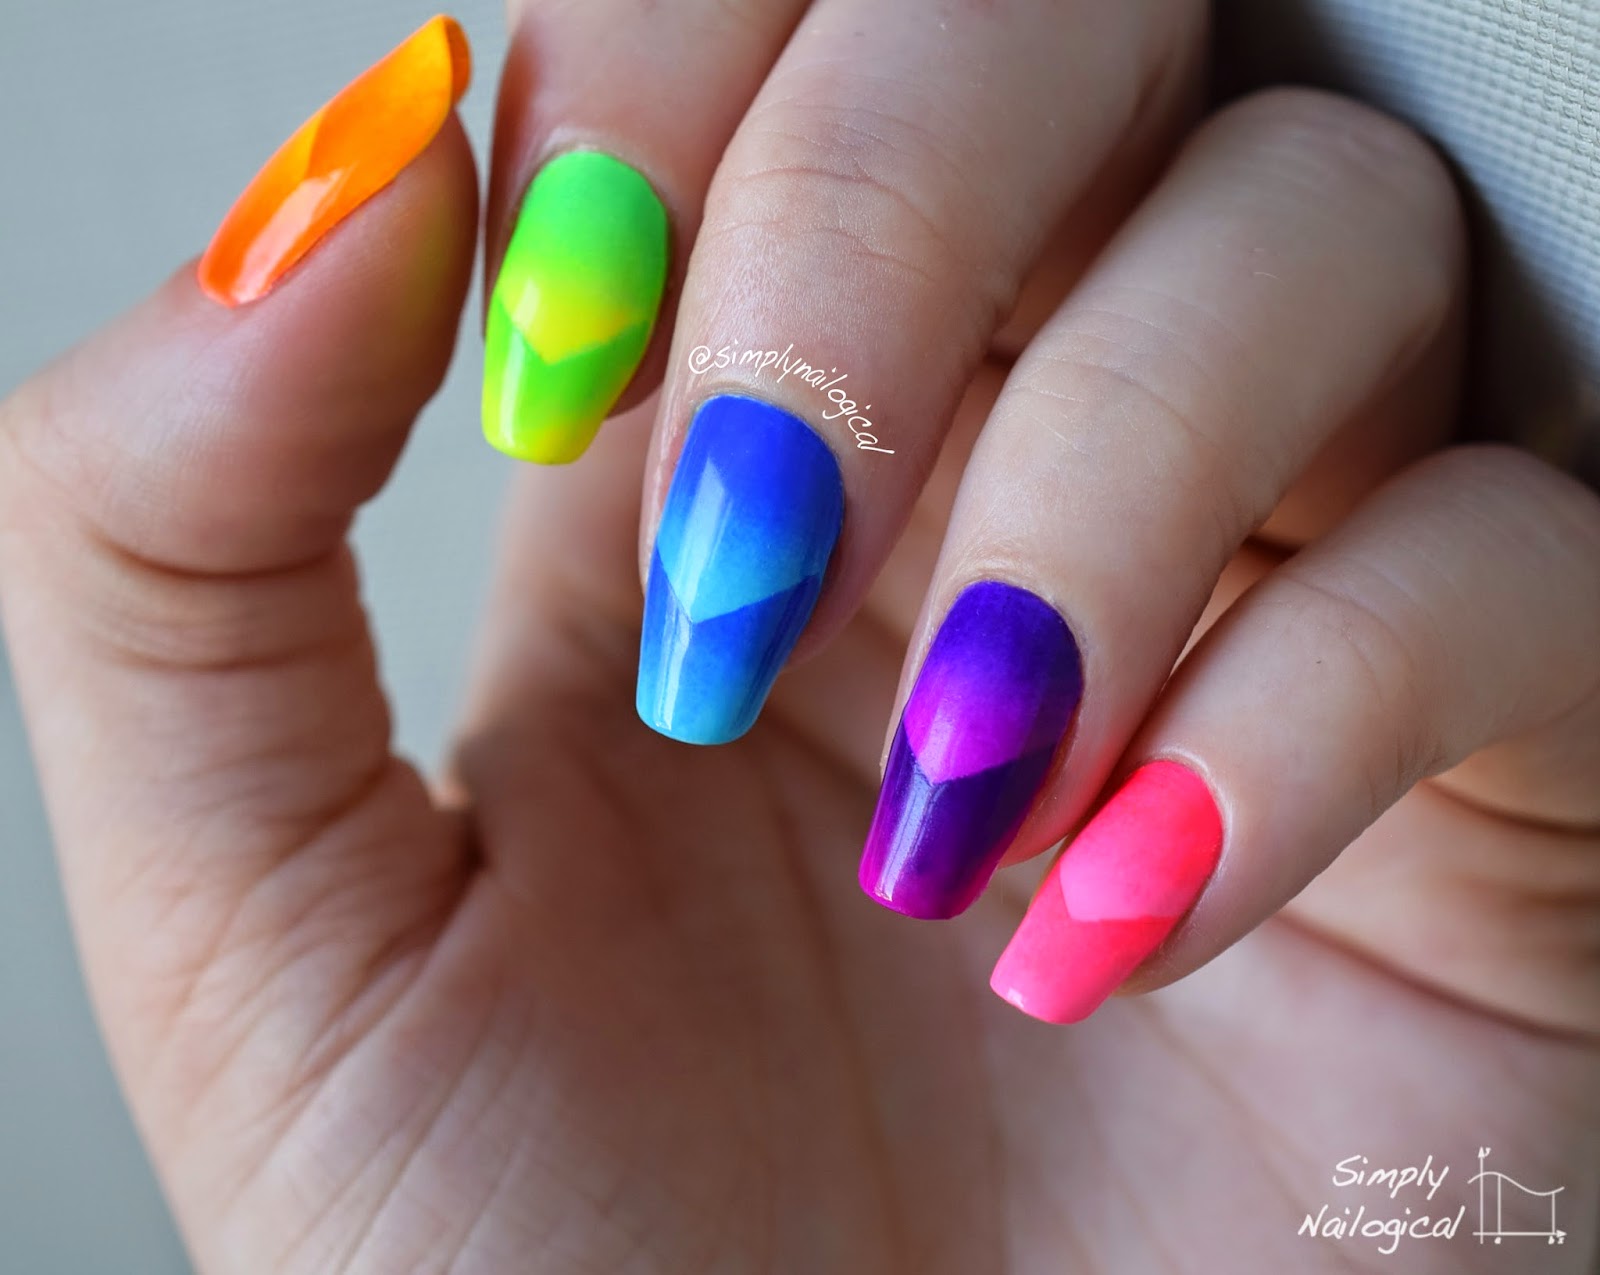 Simply Nailogical: Neon chevron scaled gradient skittle